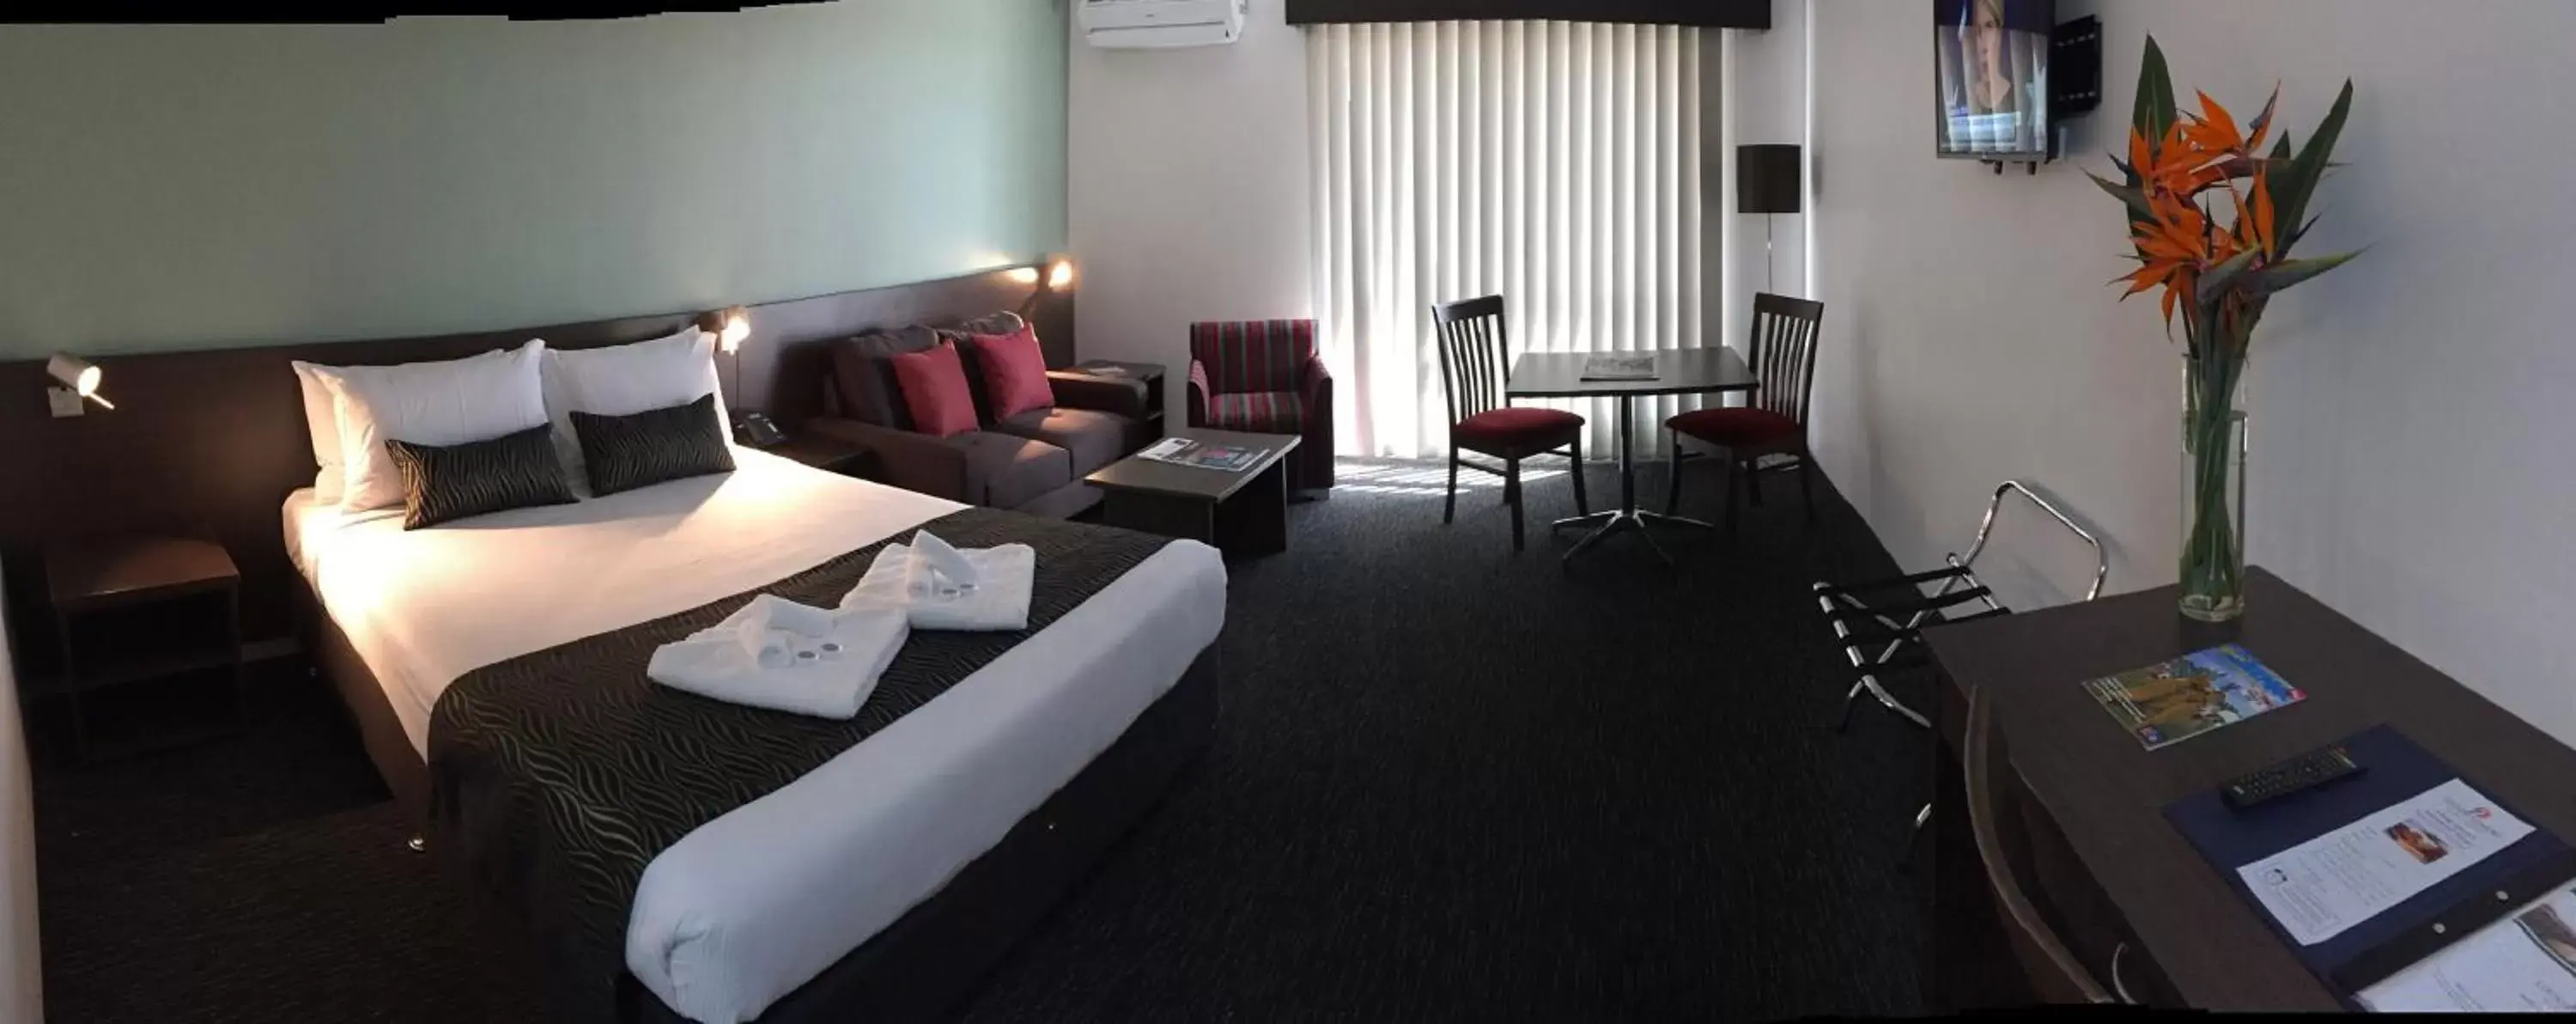 Executive King Room in Hunts Hotel Liverpool